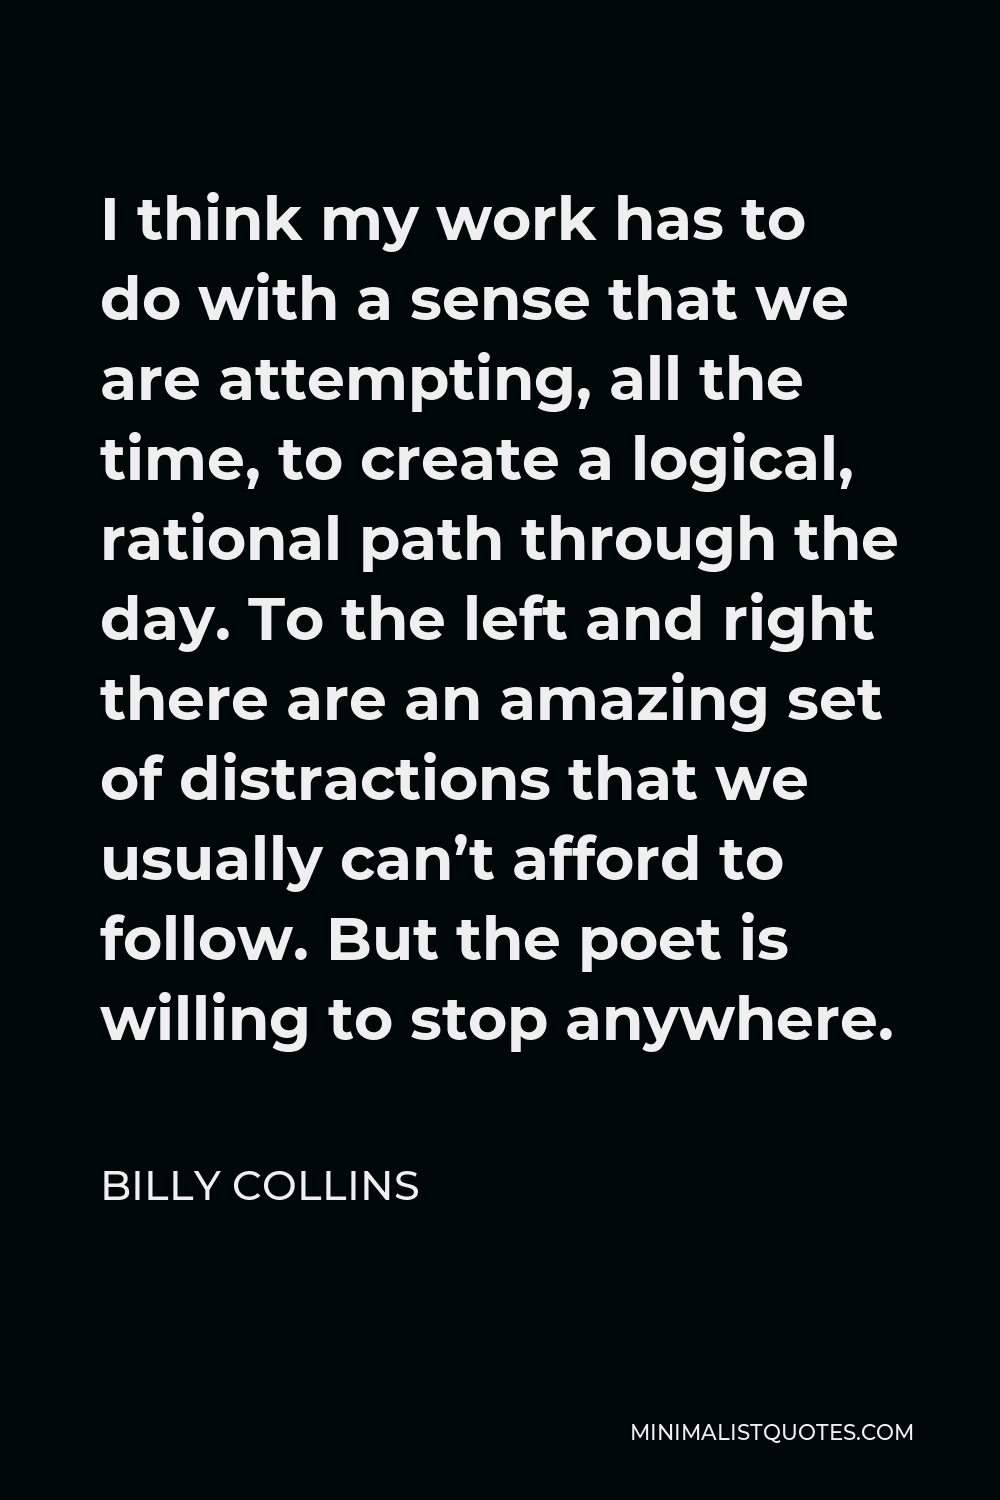 Billy Collins Quote - I think my work has to do with a sense that we are attempting, all the time, to create a logical, rational path through the day. To the left and right there are an amazing set of distractions that we usually can’t afford to follow. But the poet is willing to stop anywhere.